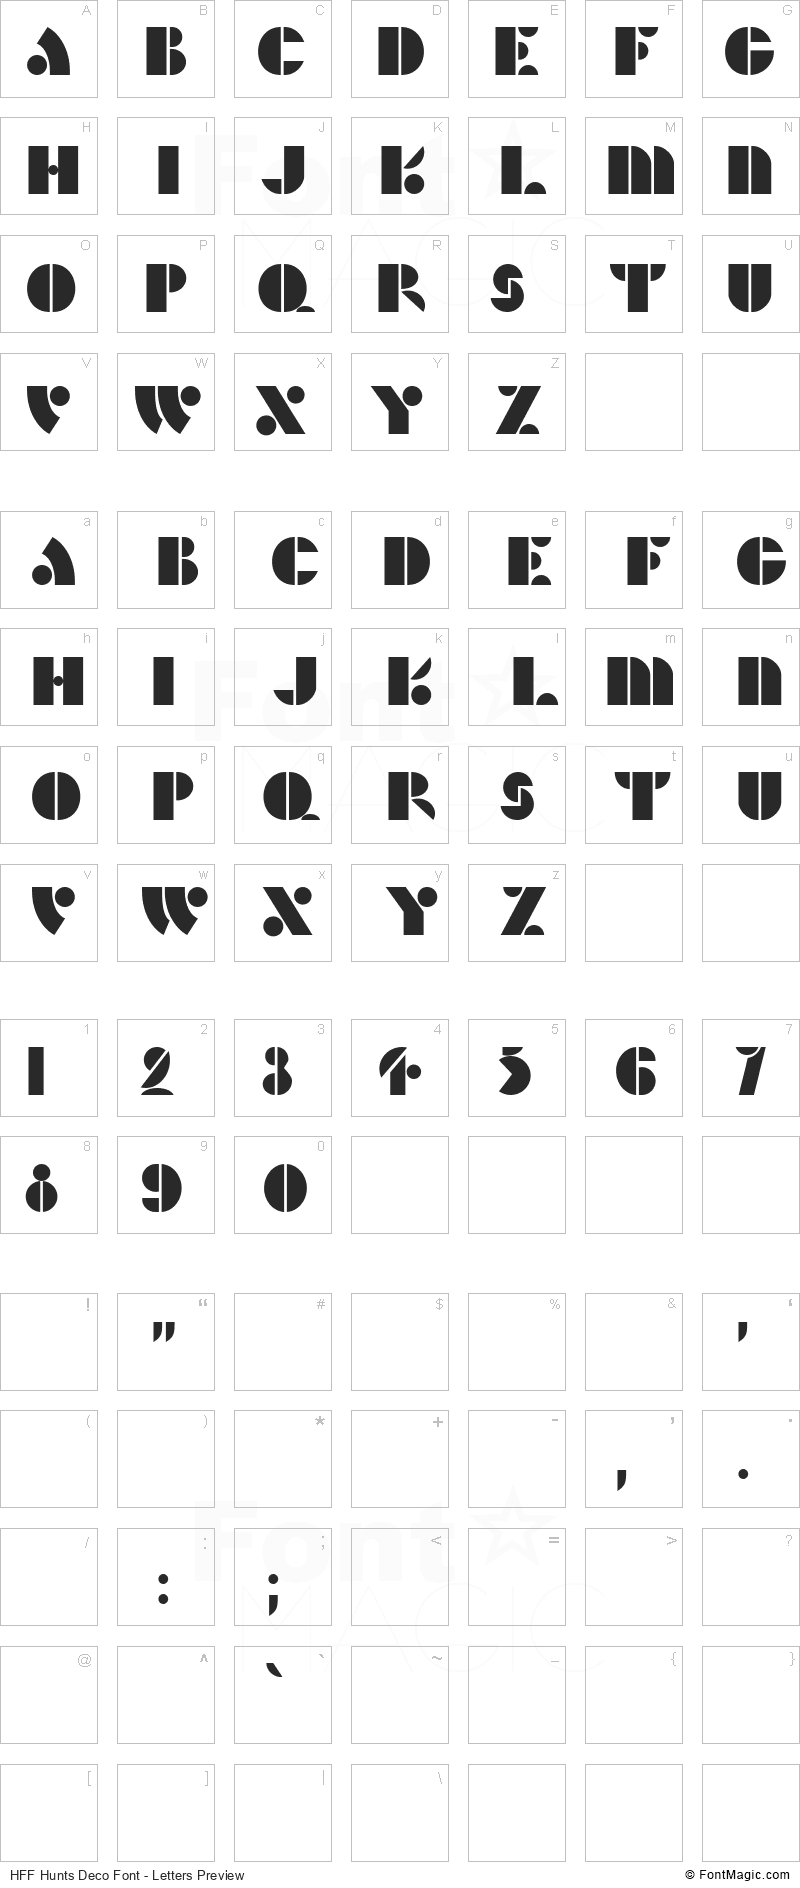 HFF Hunts Deco Font - All Latters Preview Chart